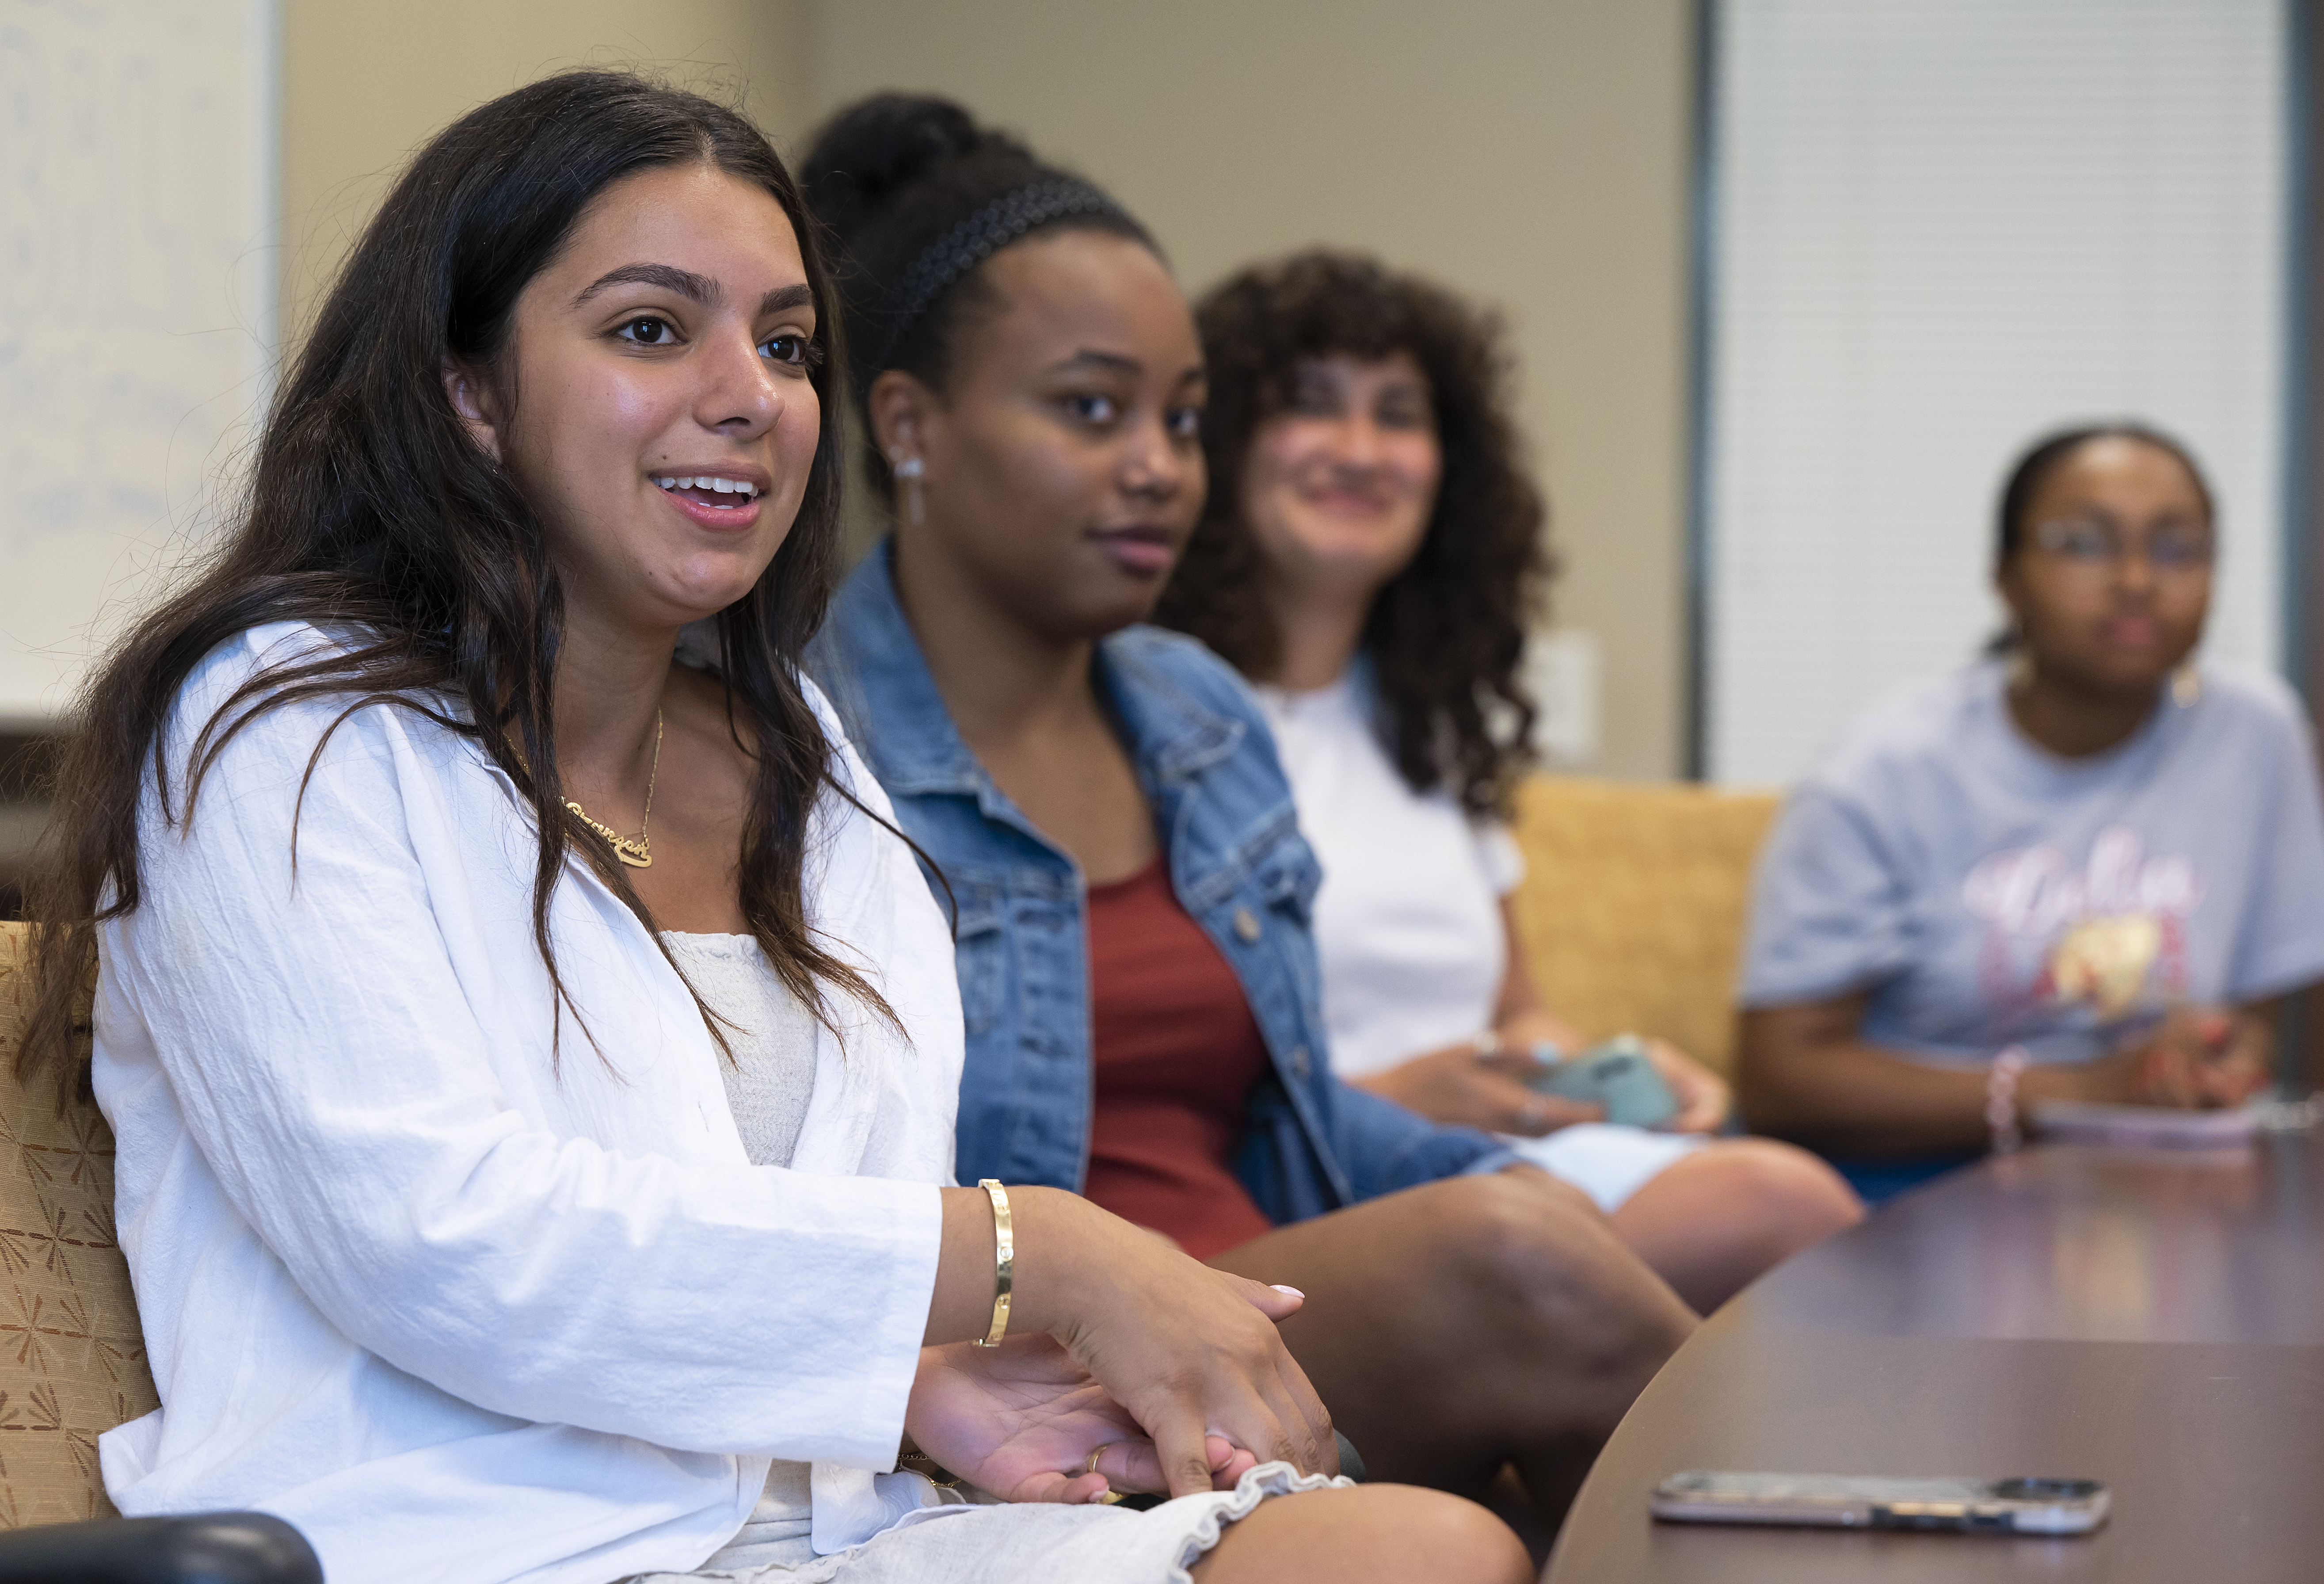 Left to right, students Nazaneen Shokri ’24, Mia Wilson ’22, Deena Elrefai ’22, and Queen Assata Stephens ’22 speak about their experiences with the H.E.R. Lab, Monday, April 11, 2022 at Elon University. (Rob Brown photo)